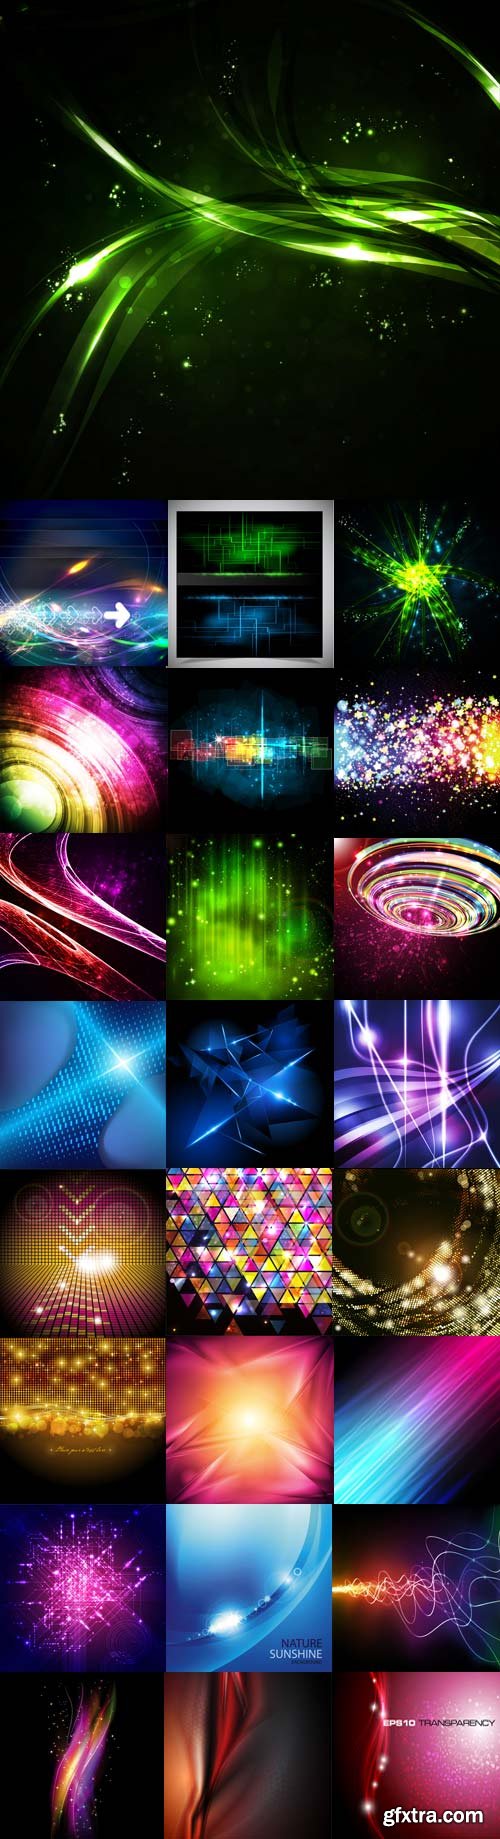 Bright colorful abstract backgrounds vector  - 2